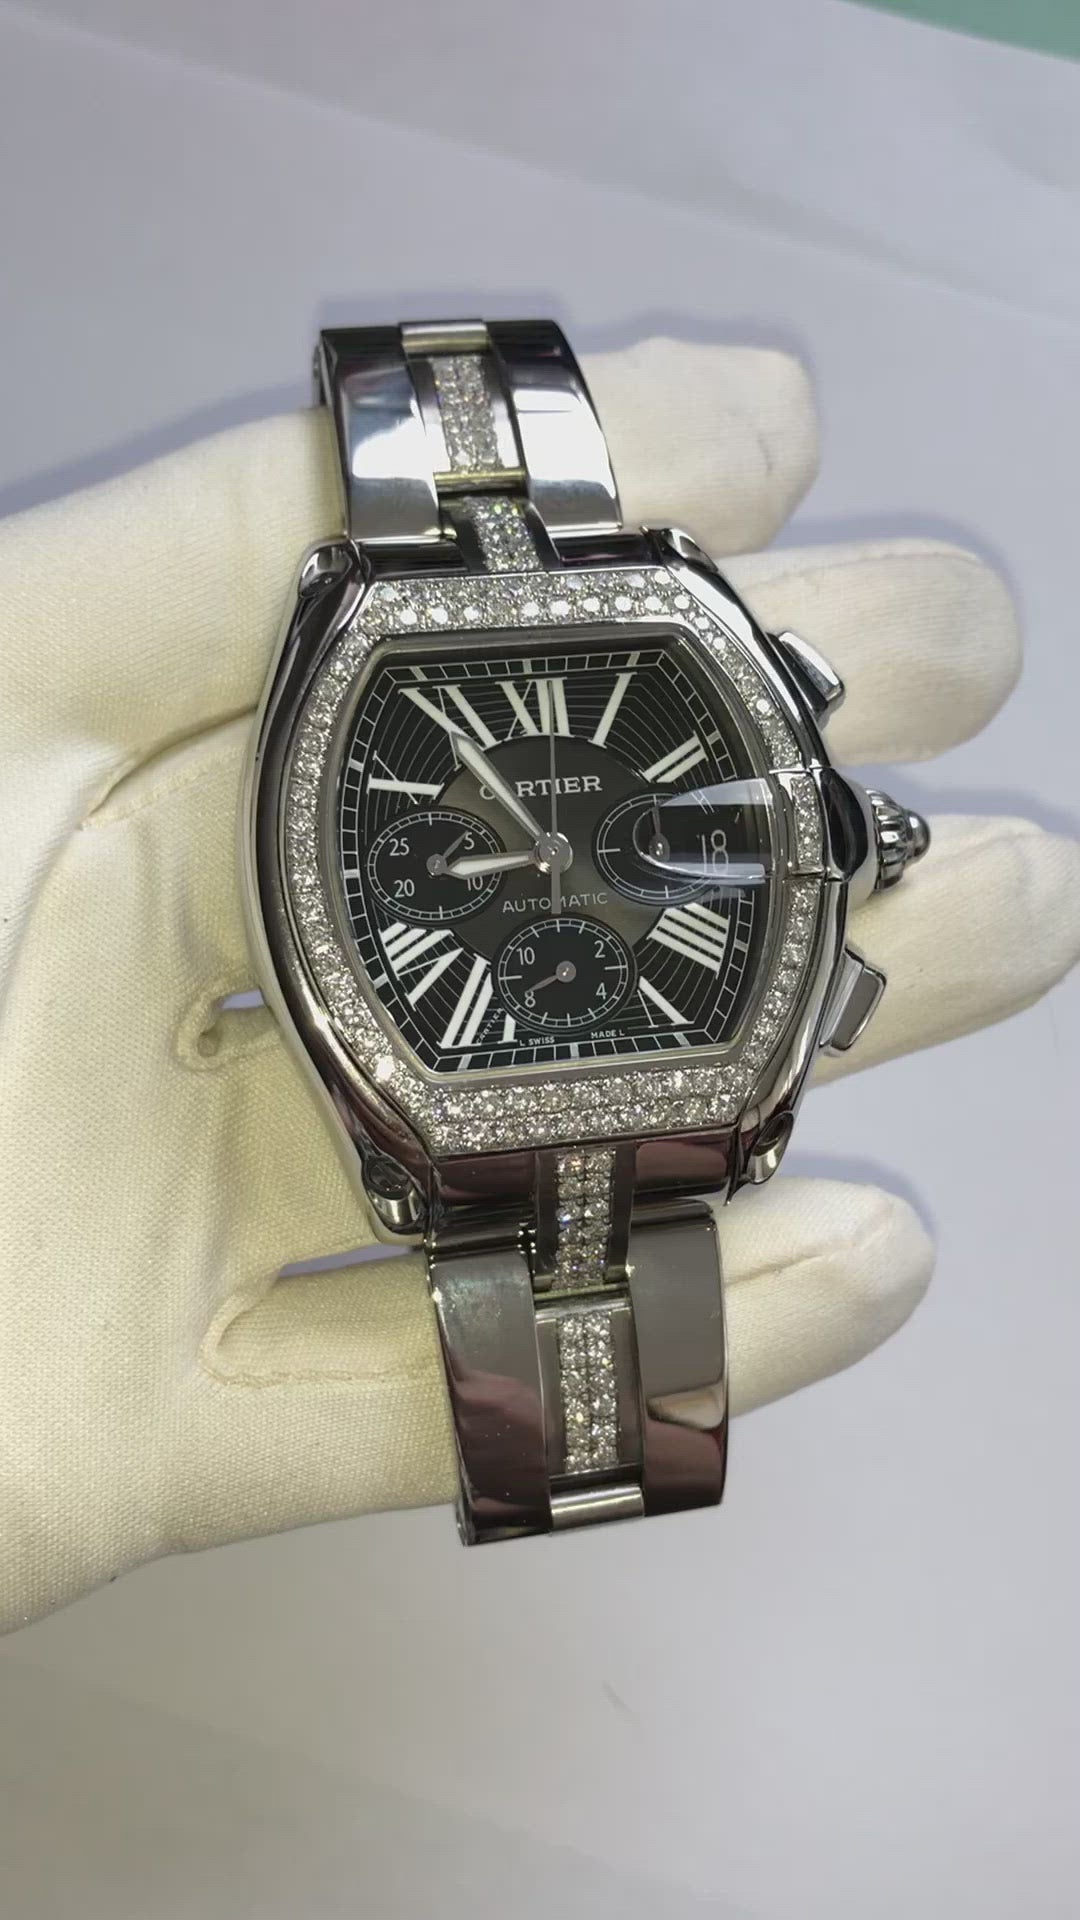 CARTIER ROADSTER Chronograph 2618 Automatic 42mm Steel ~4.5TCW Diamond WatchCARTIER ROADSTER Chronograph 2618 Automatic 42mm Steel ~4.5TCW Diamond Watch